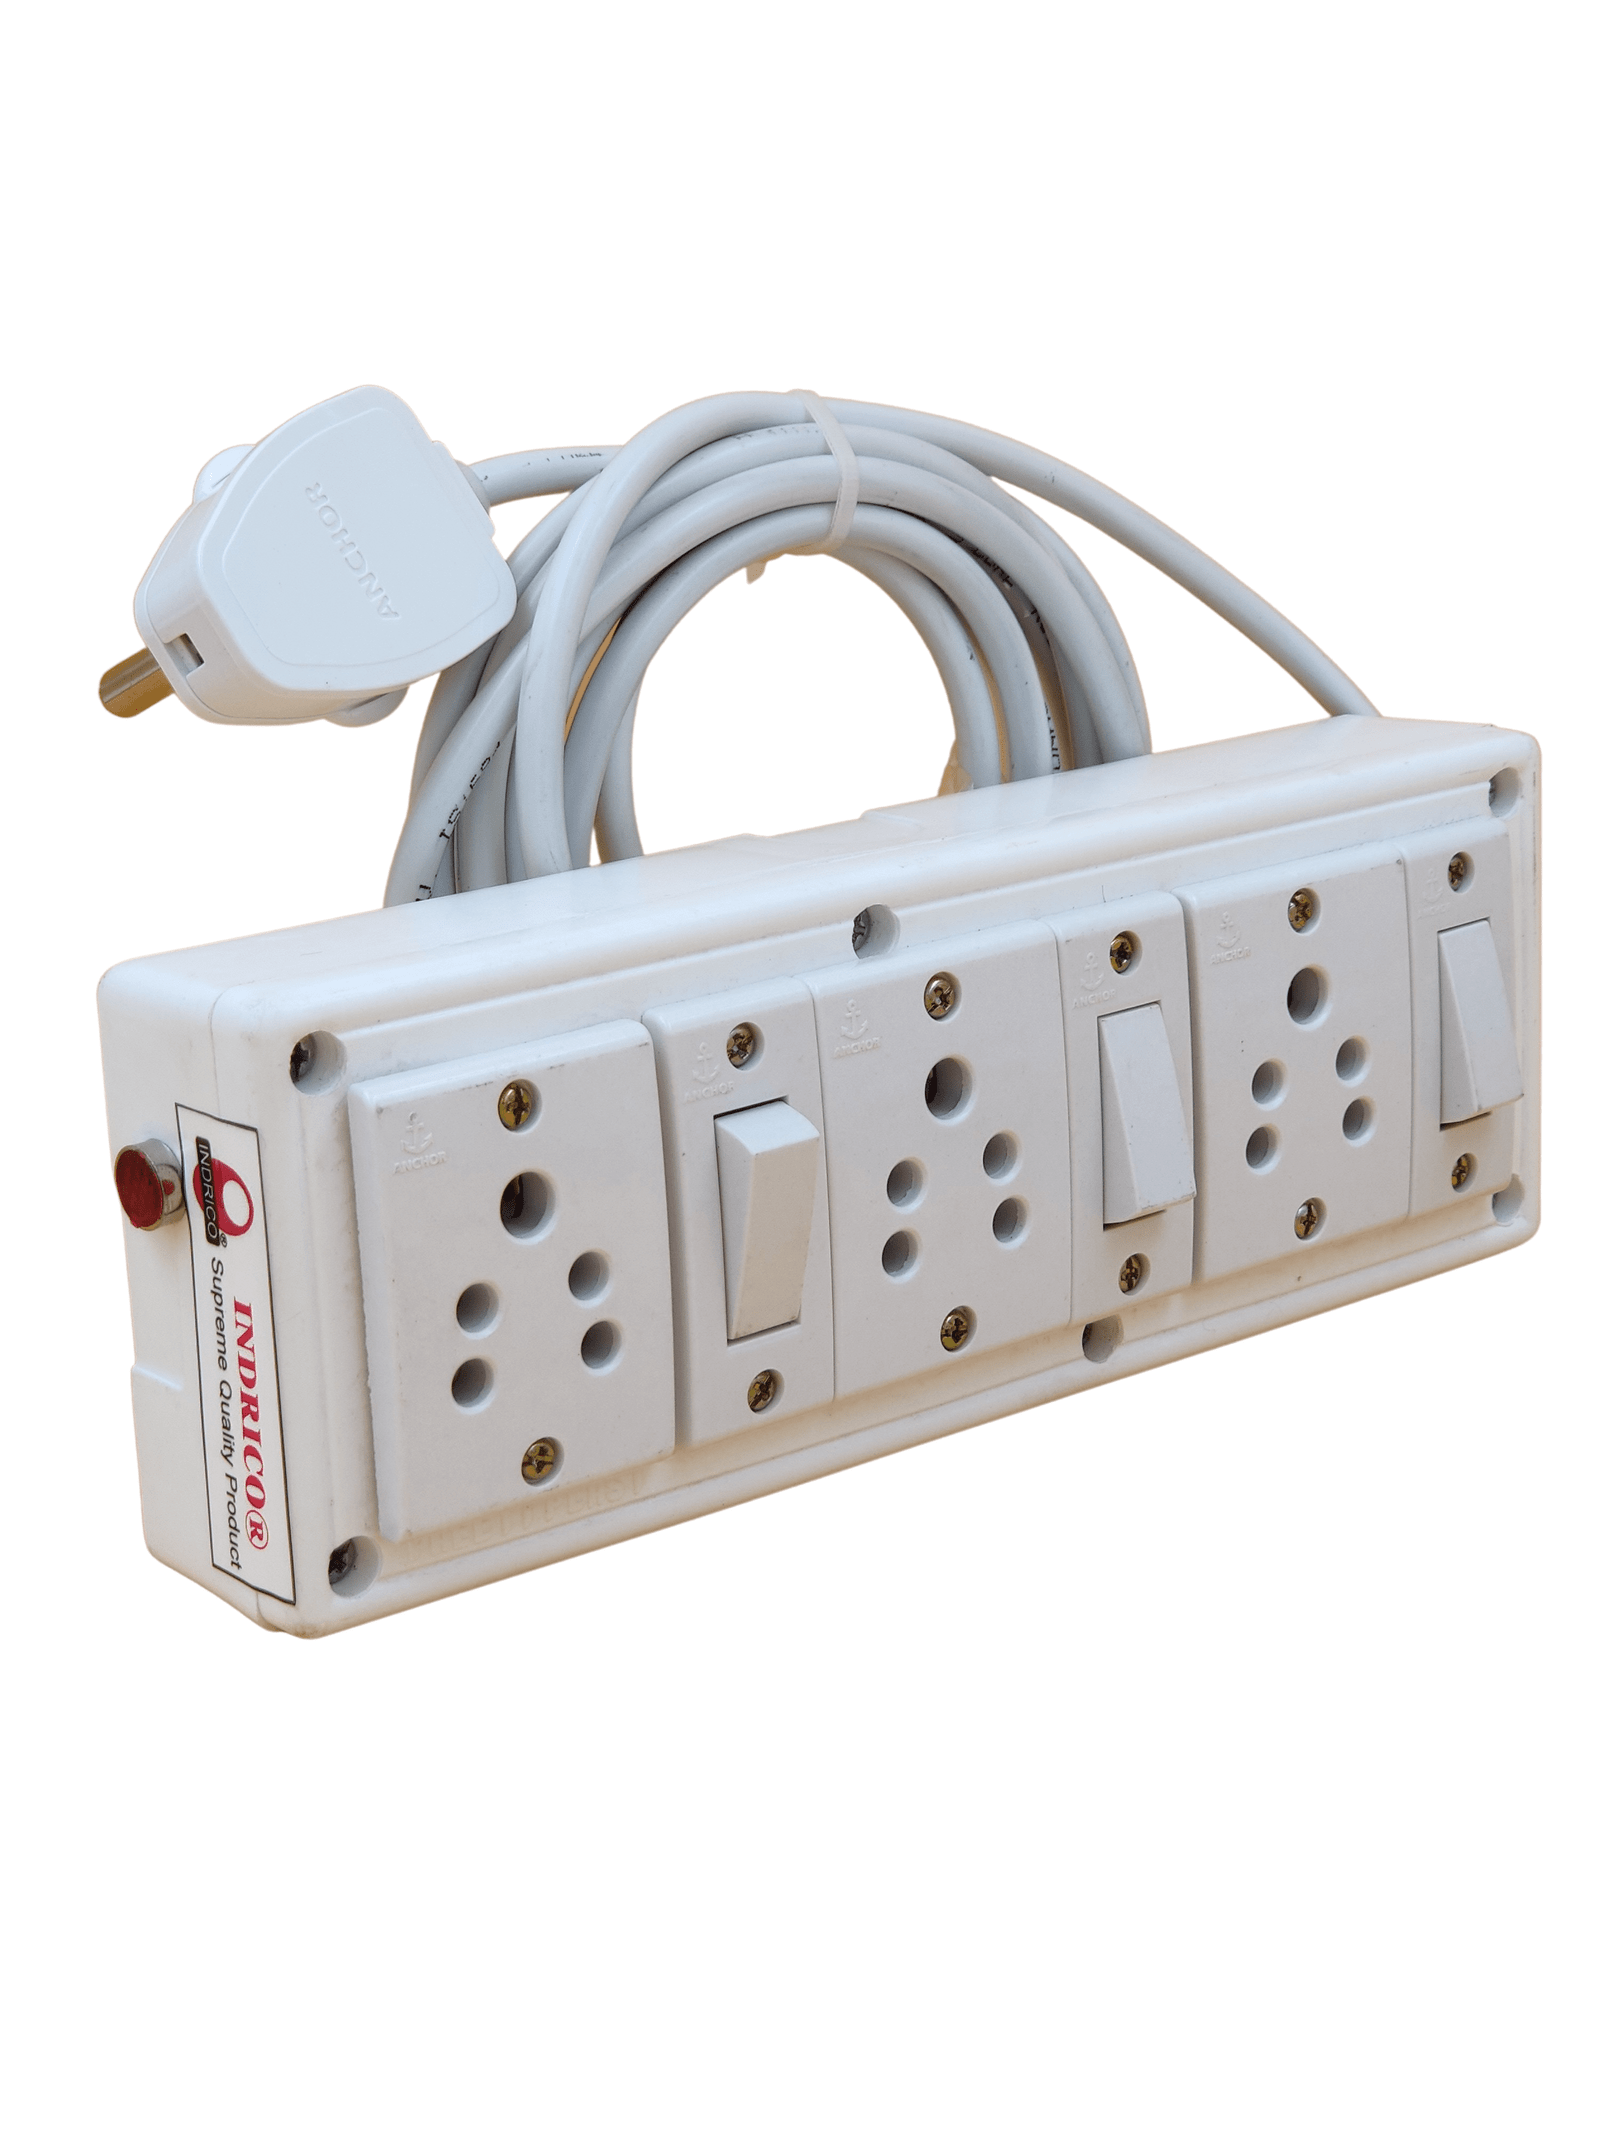 INDRICO Junction Box with Individual Switch 3+3 (Max. rating 1200W) PVC  White Pack of 1[HSN CODE: 8537] - INDRICO®